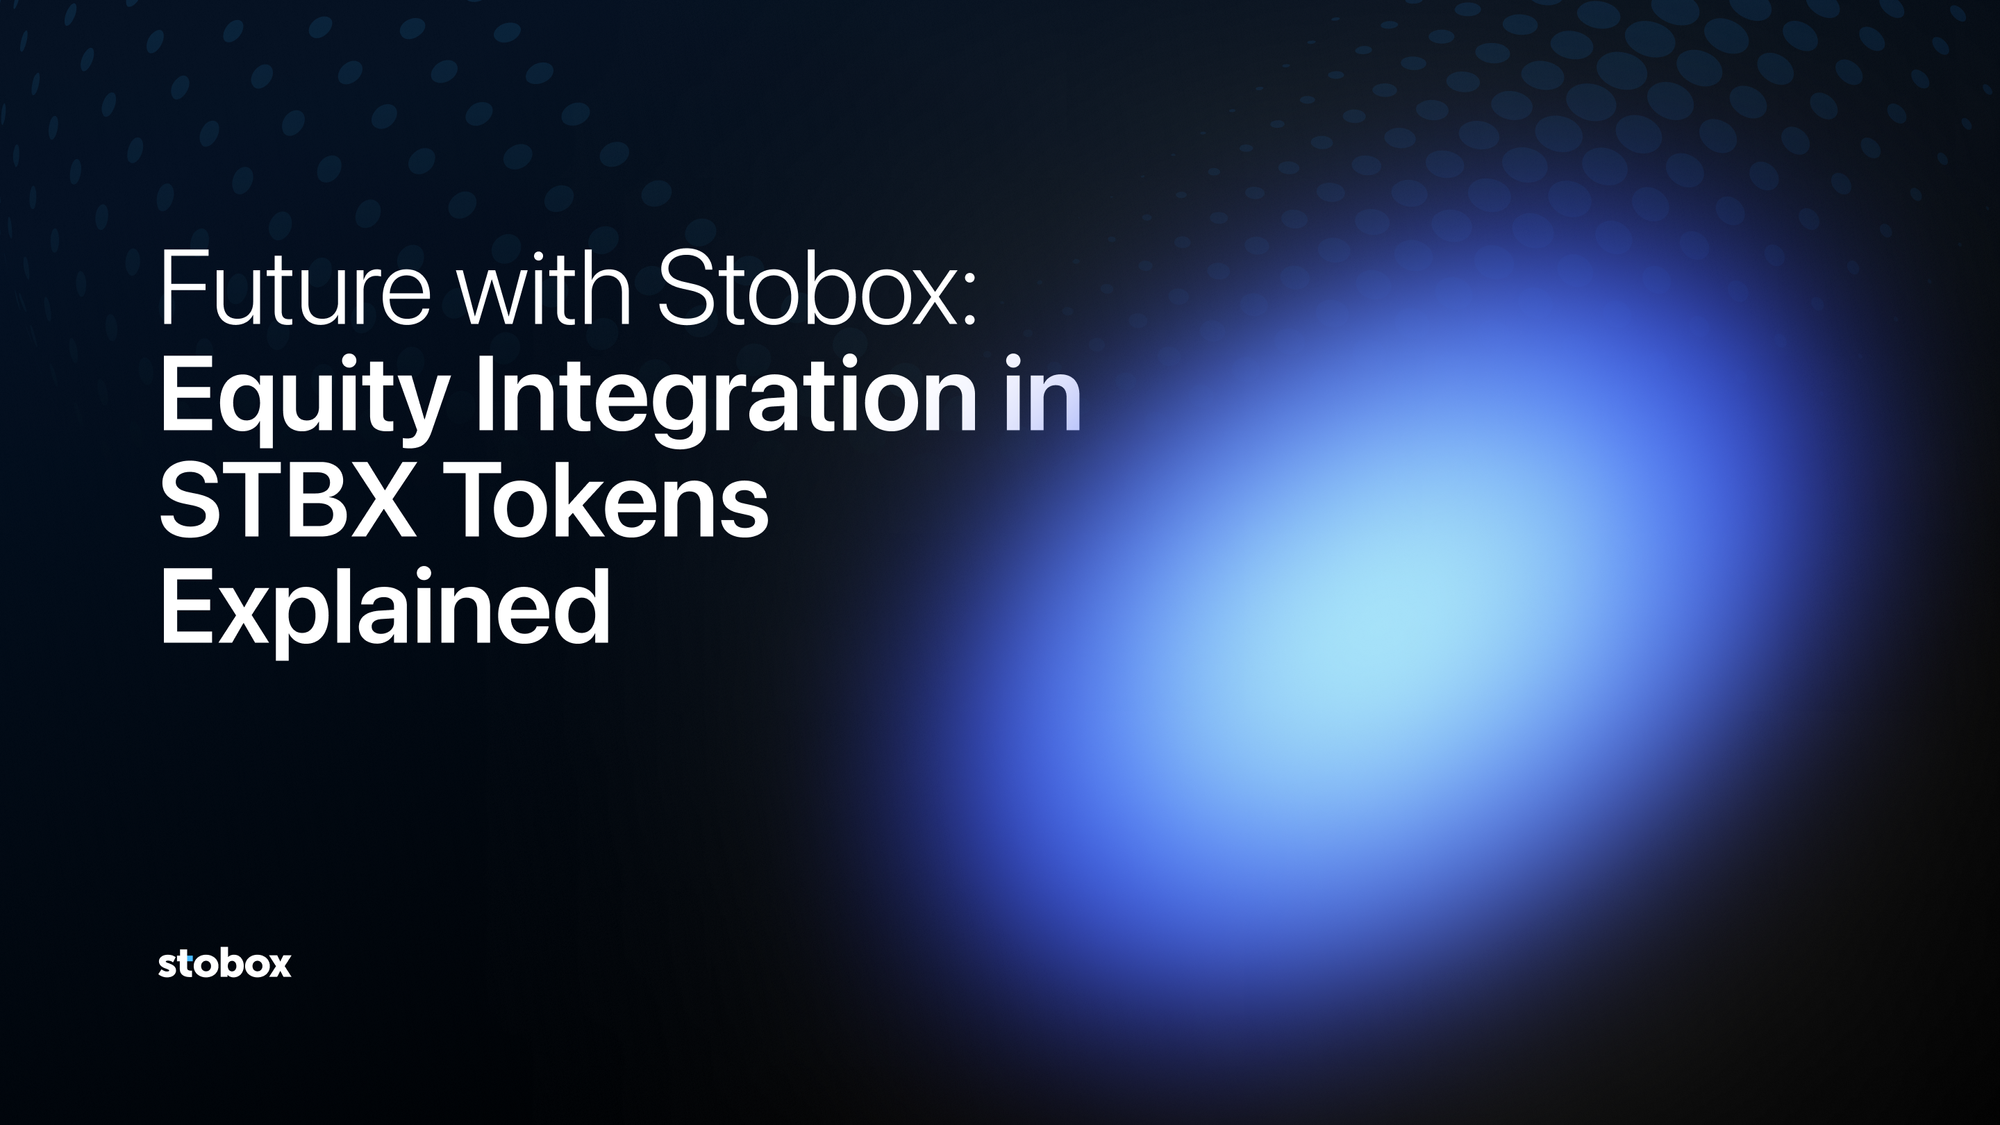 Future with Stobox: Equity Integration in STBX Tokens Explained